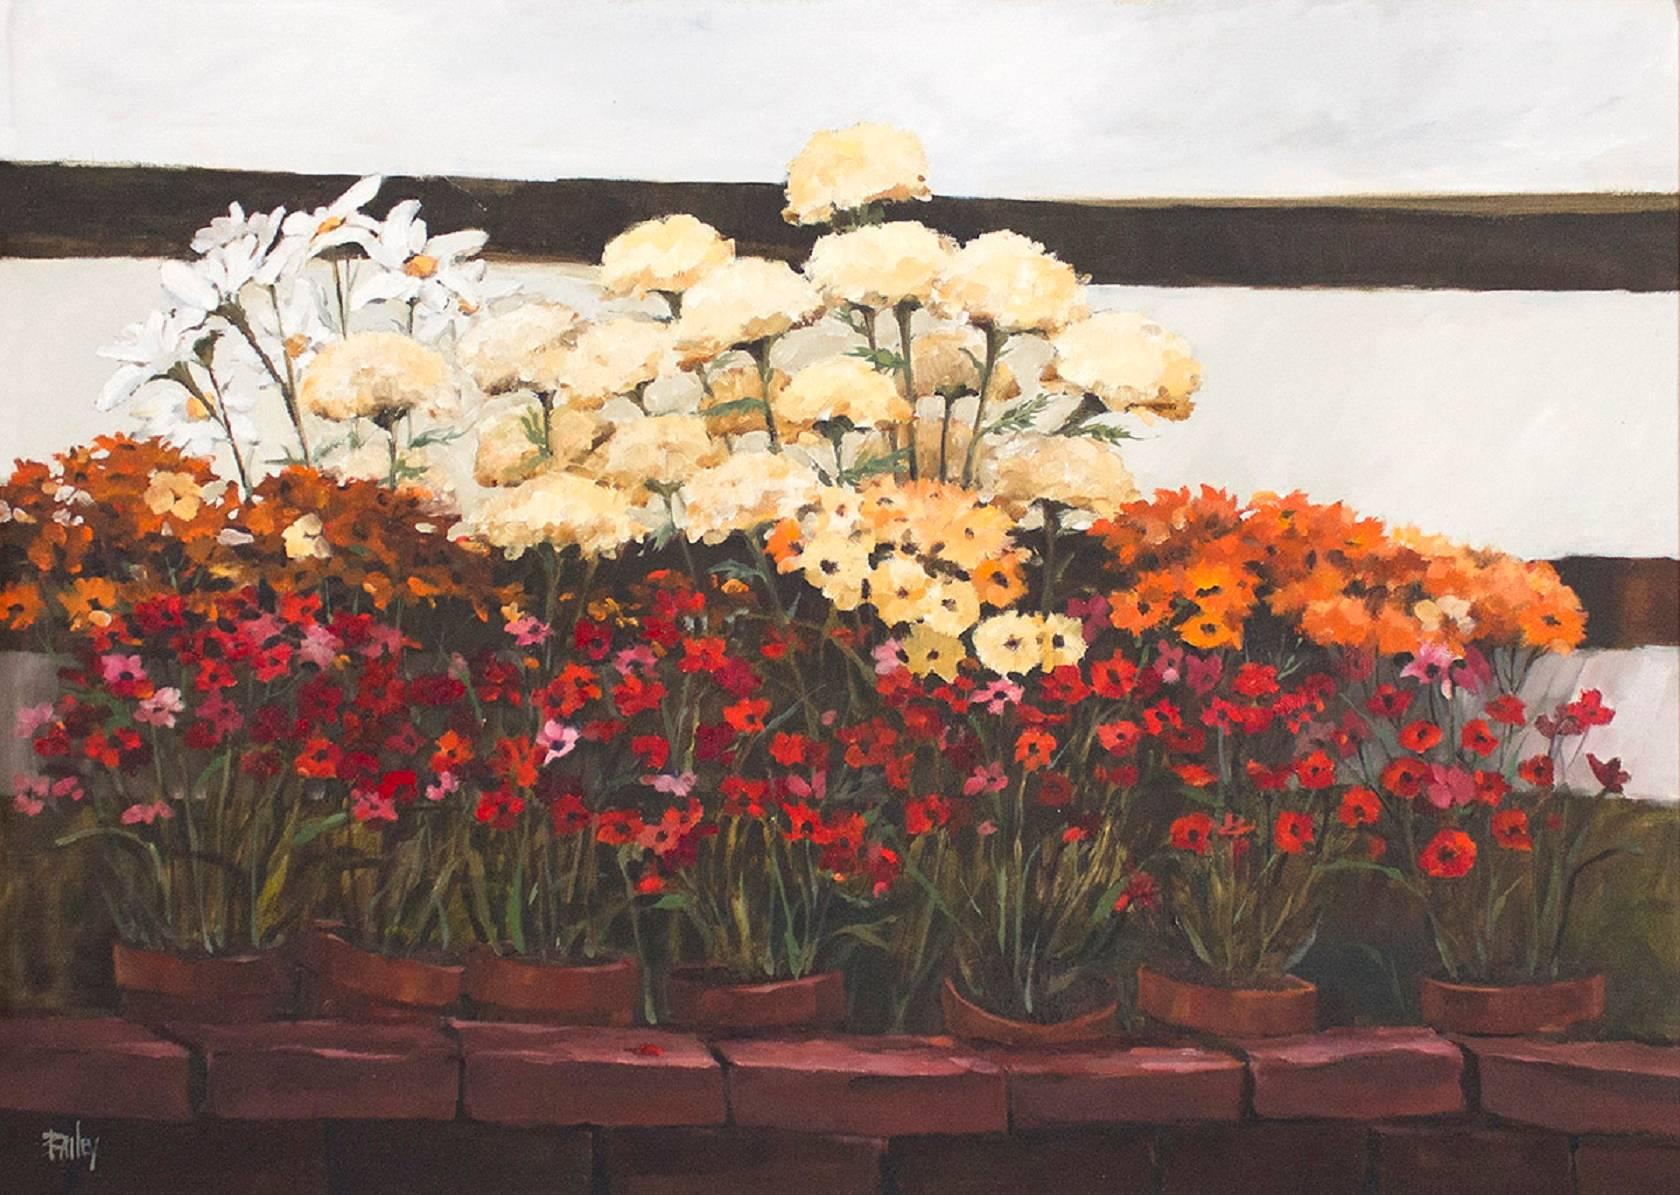 PAMELA’S GARDEN REMEMBERED - Painting by Roy Bailey